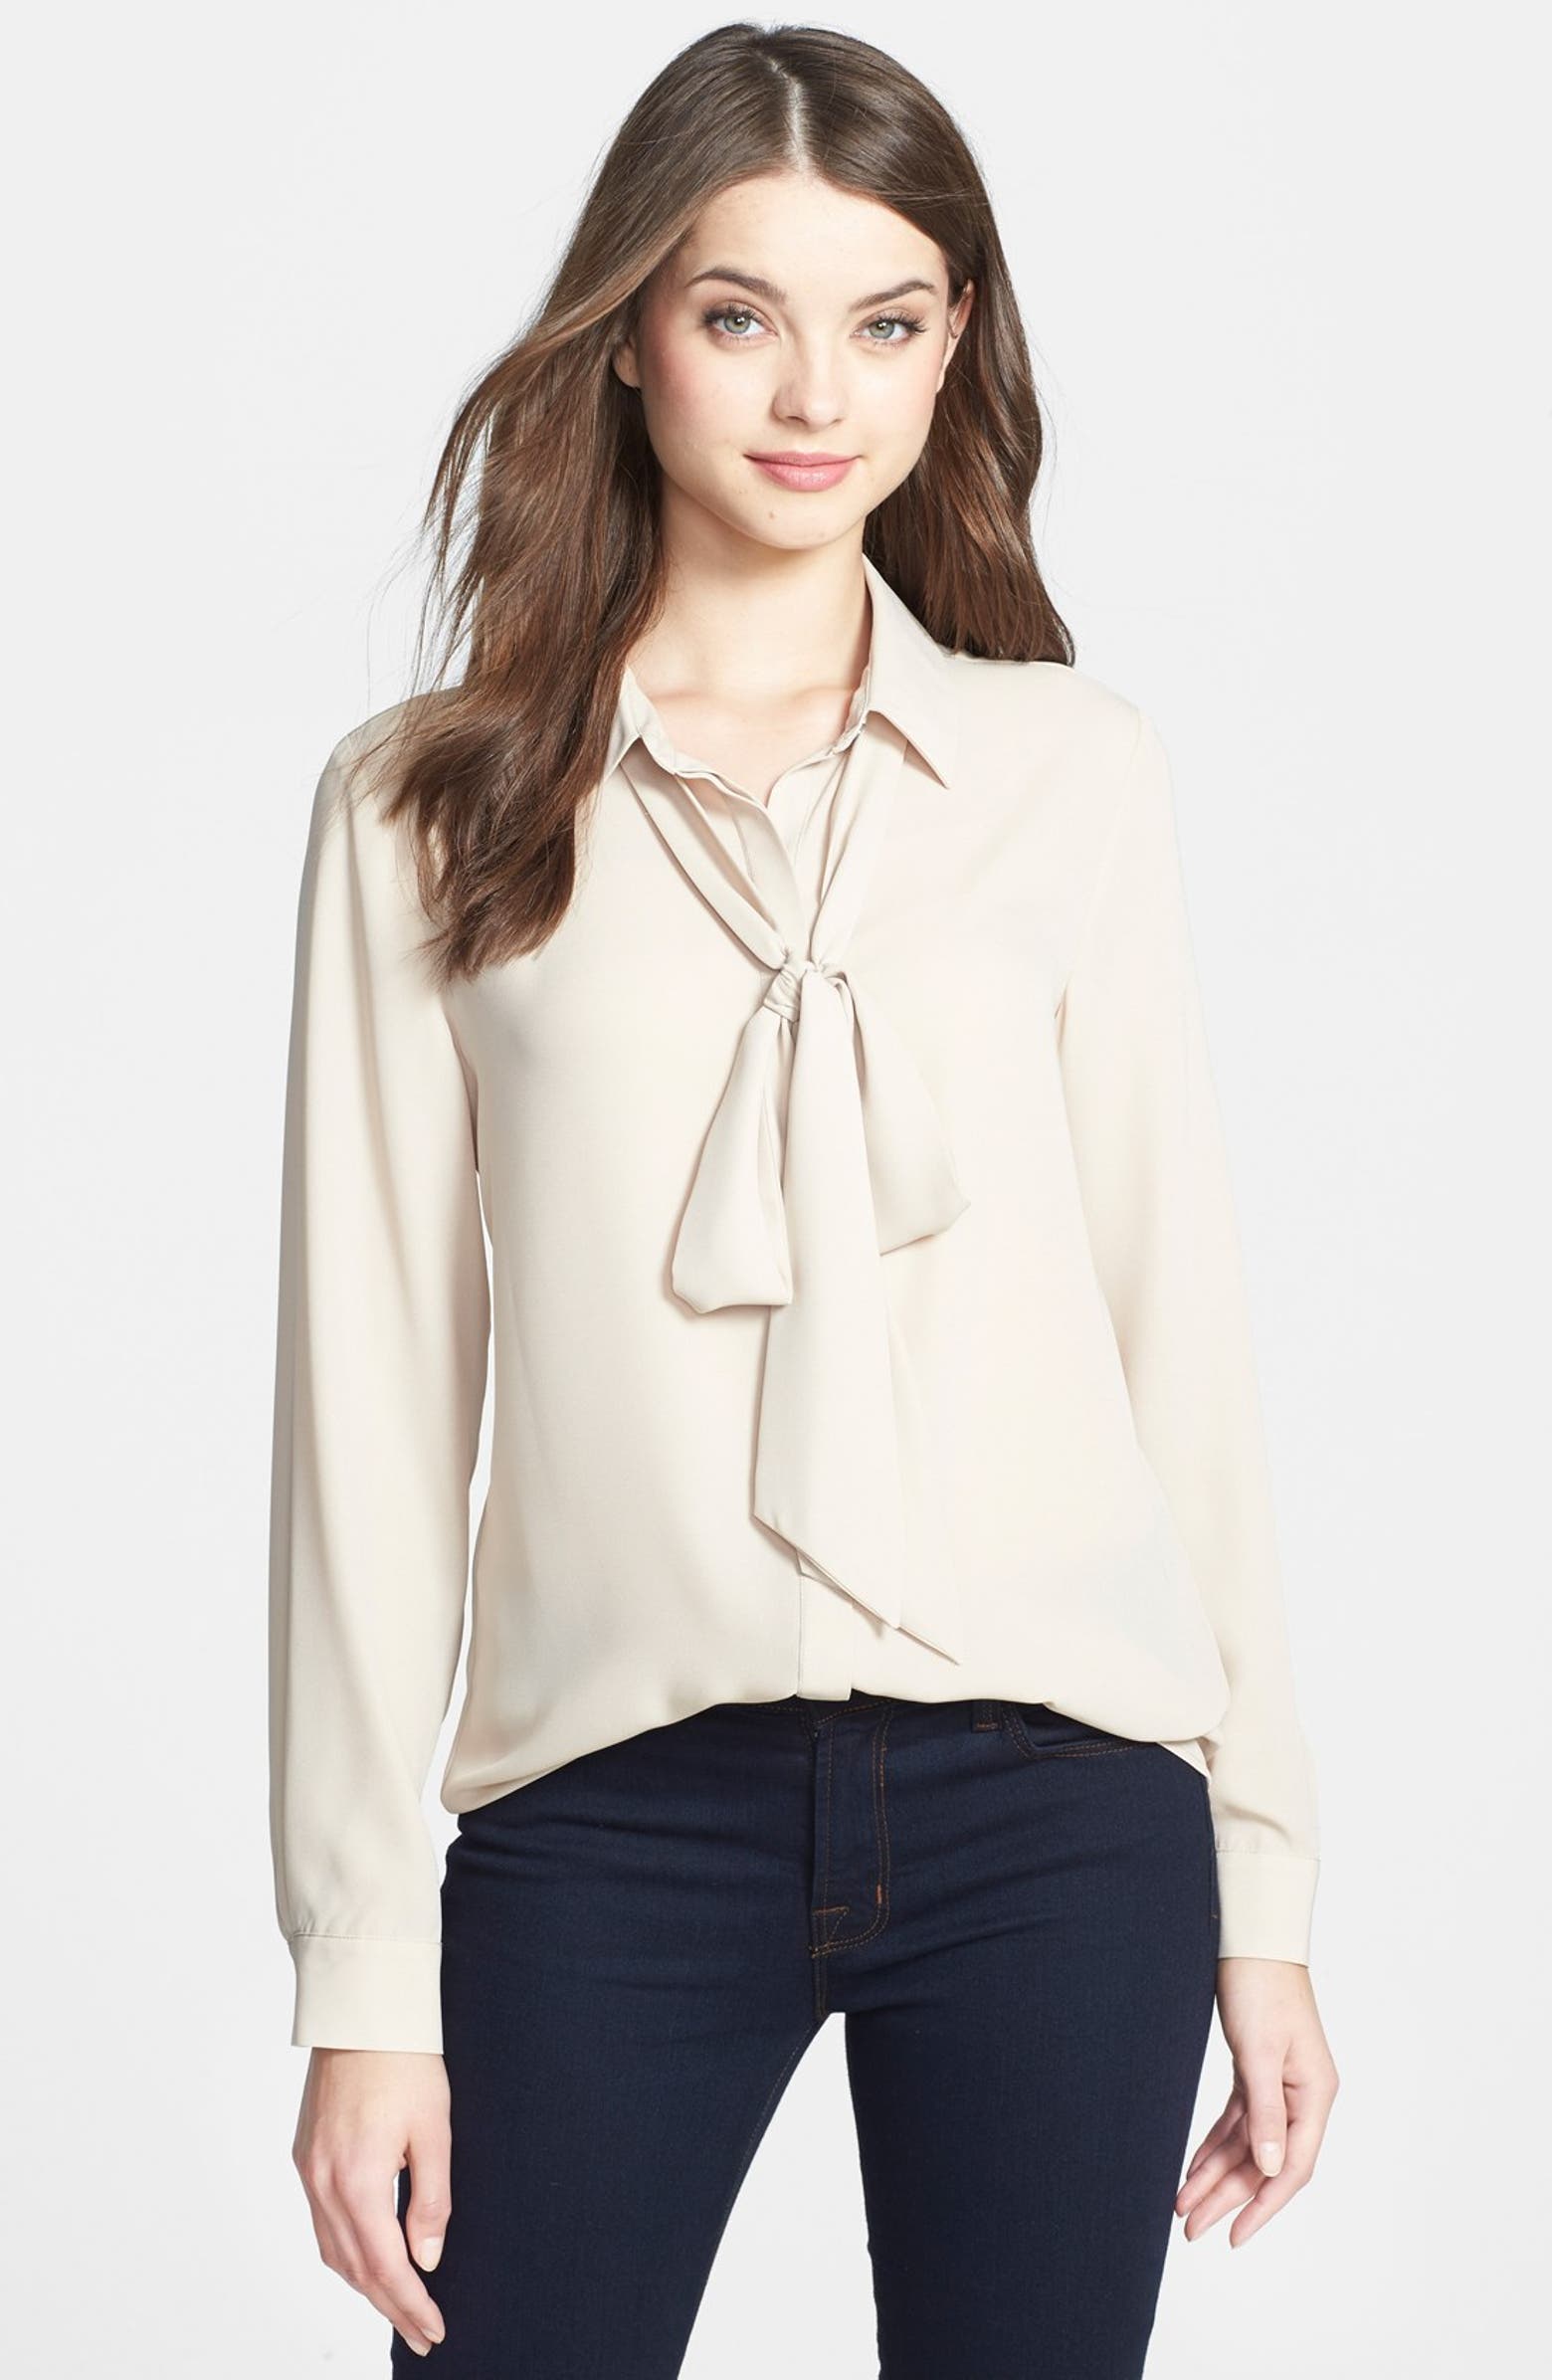 Vince Camuto Tie Neck Blouse | Nordstrom